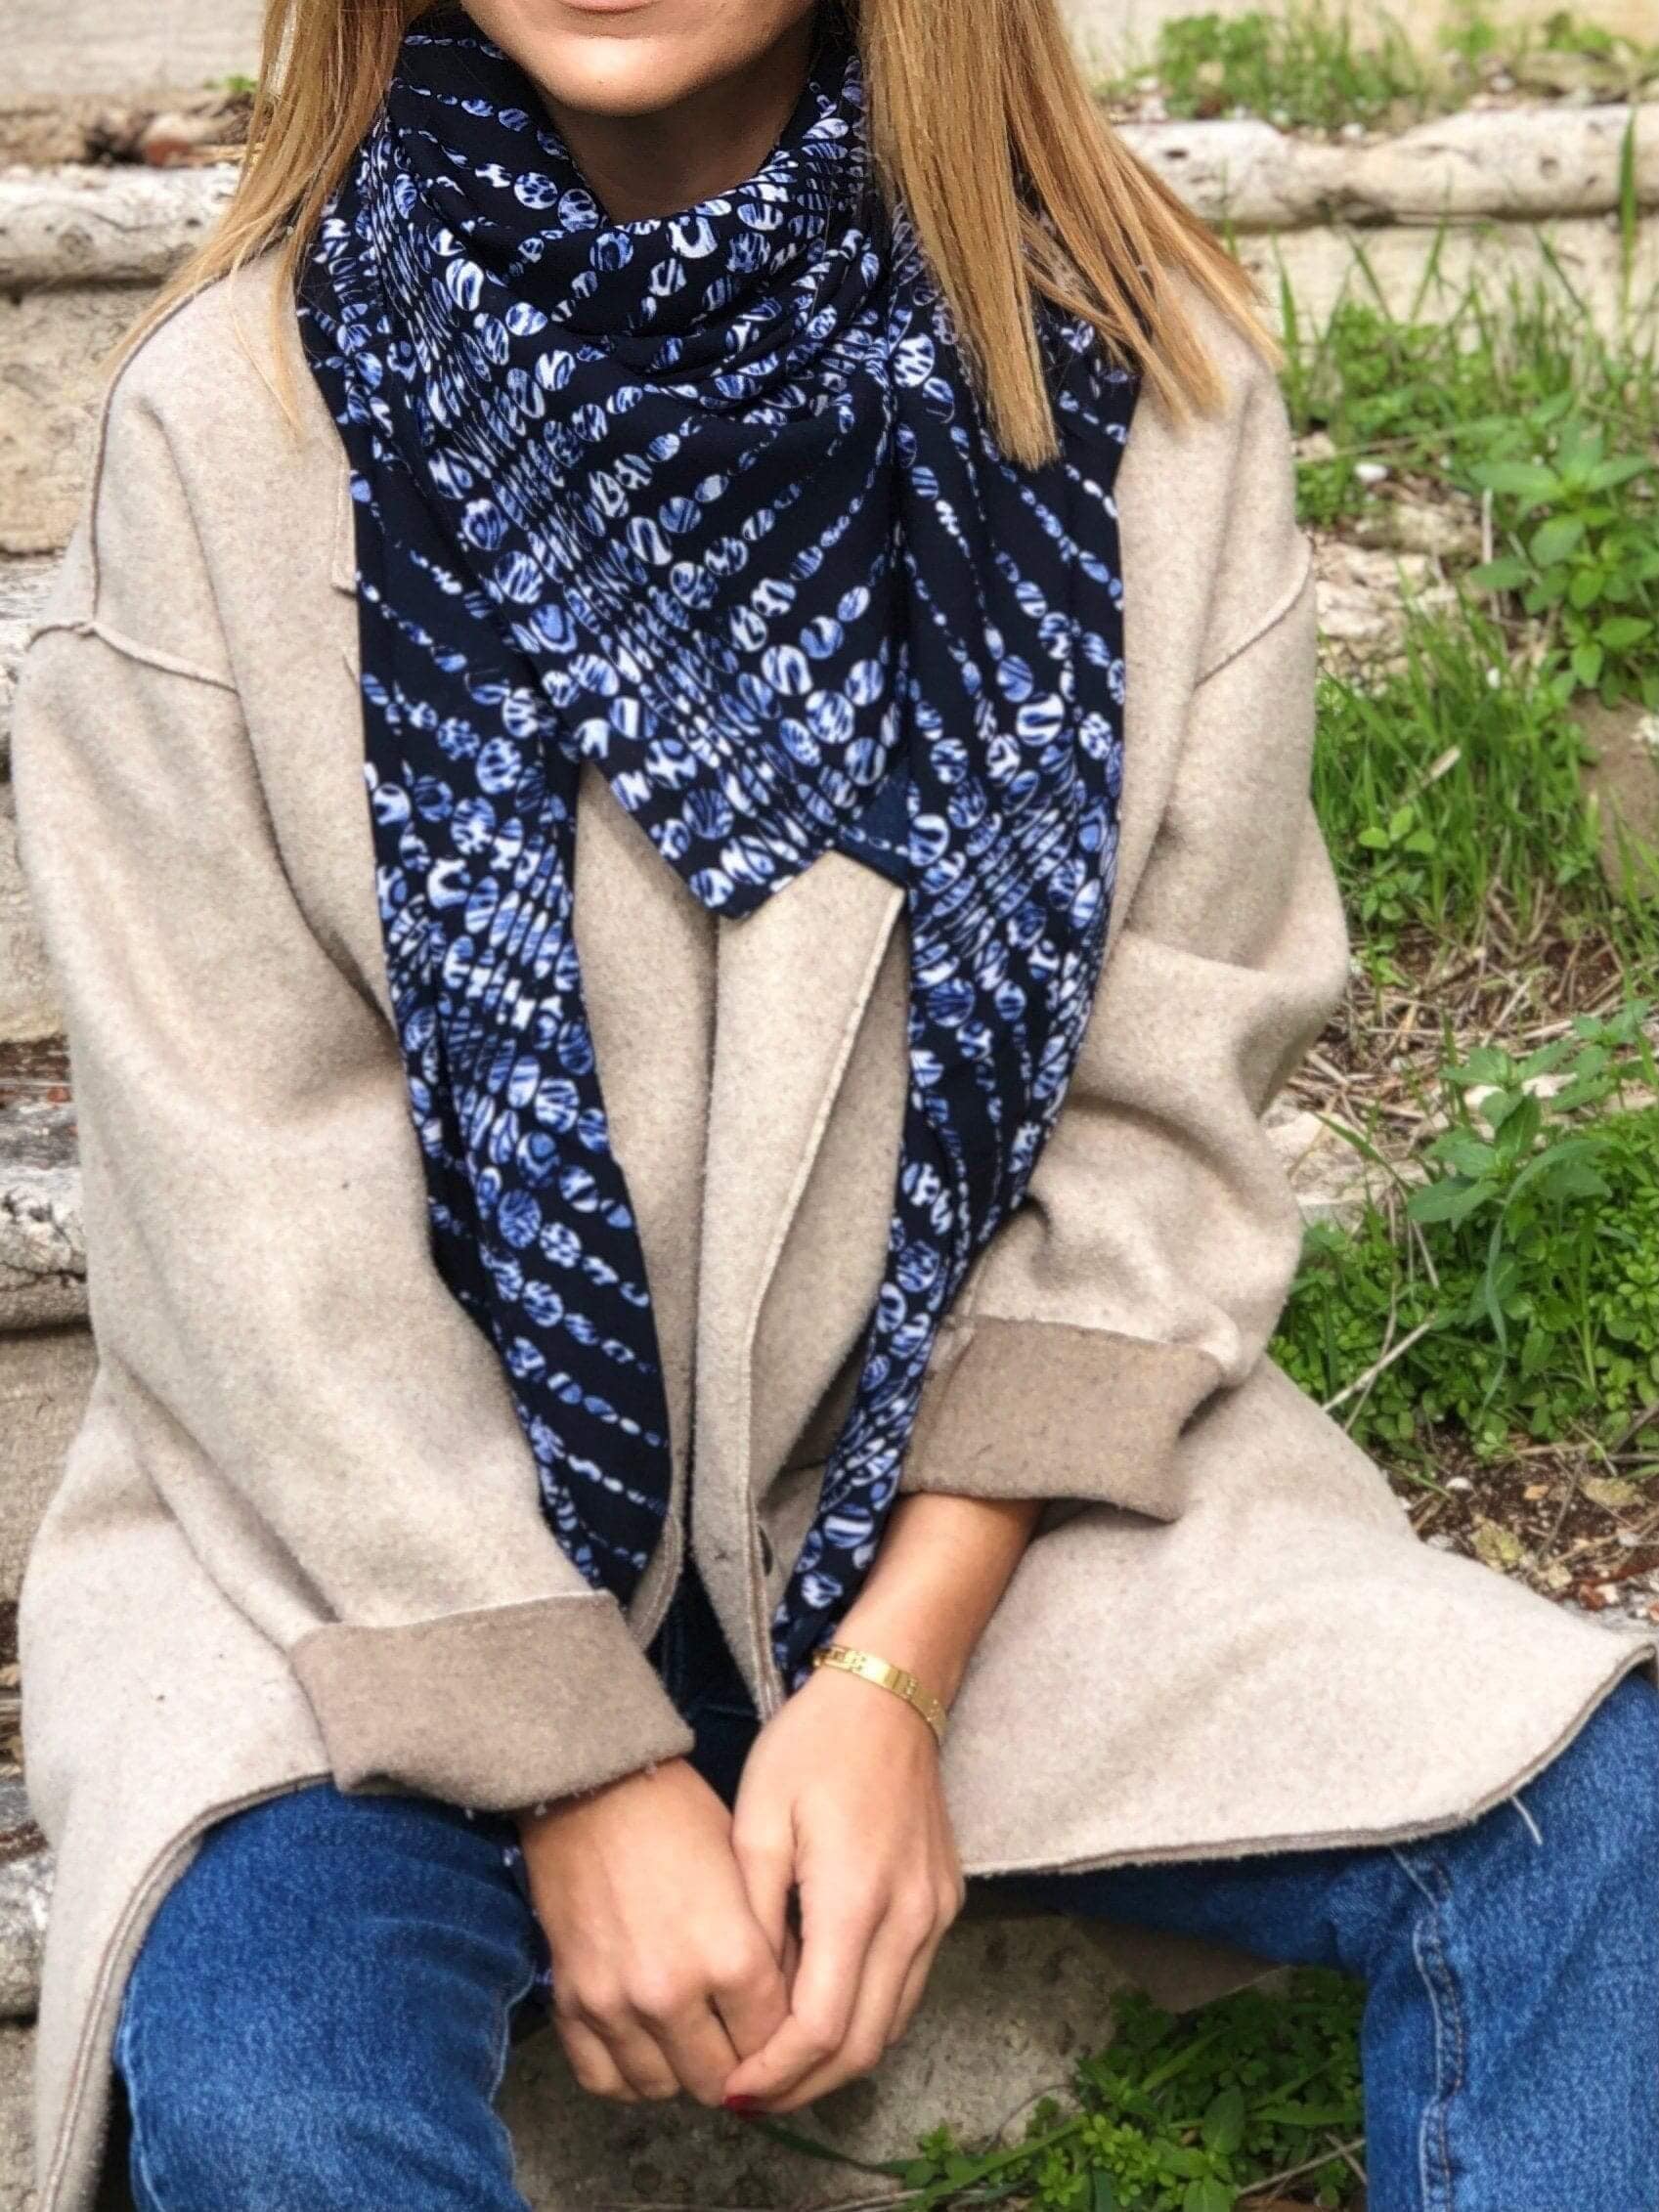 Cotton Large Square Navy Blue Scarf - Soft and cozy scarf perfect for chilly spring and autumn days.